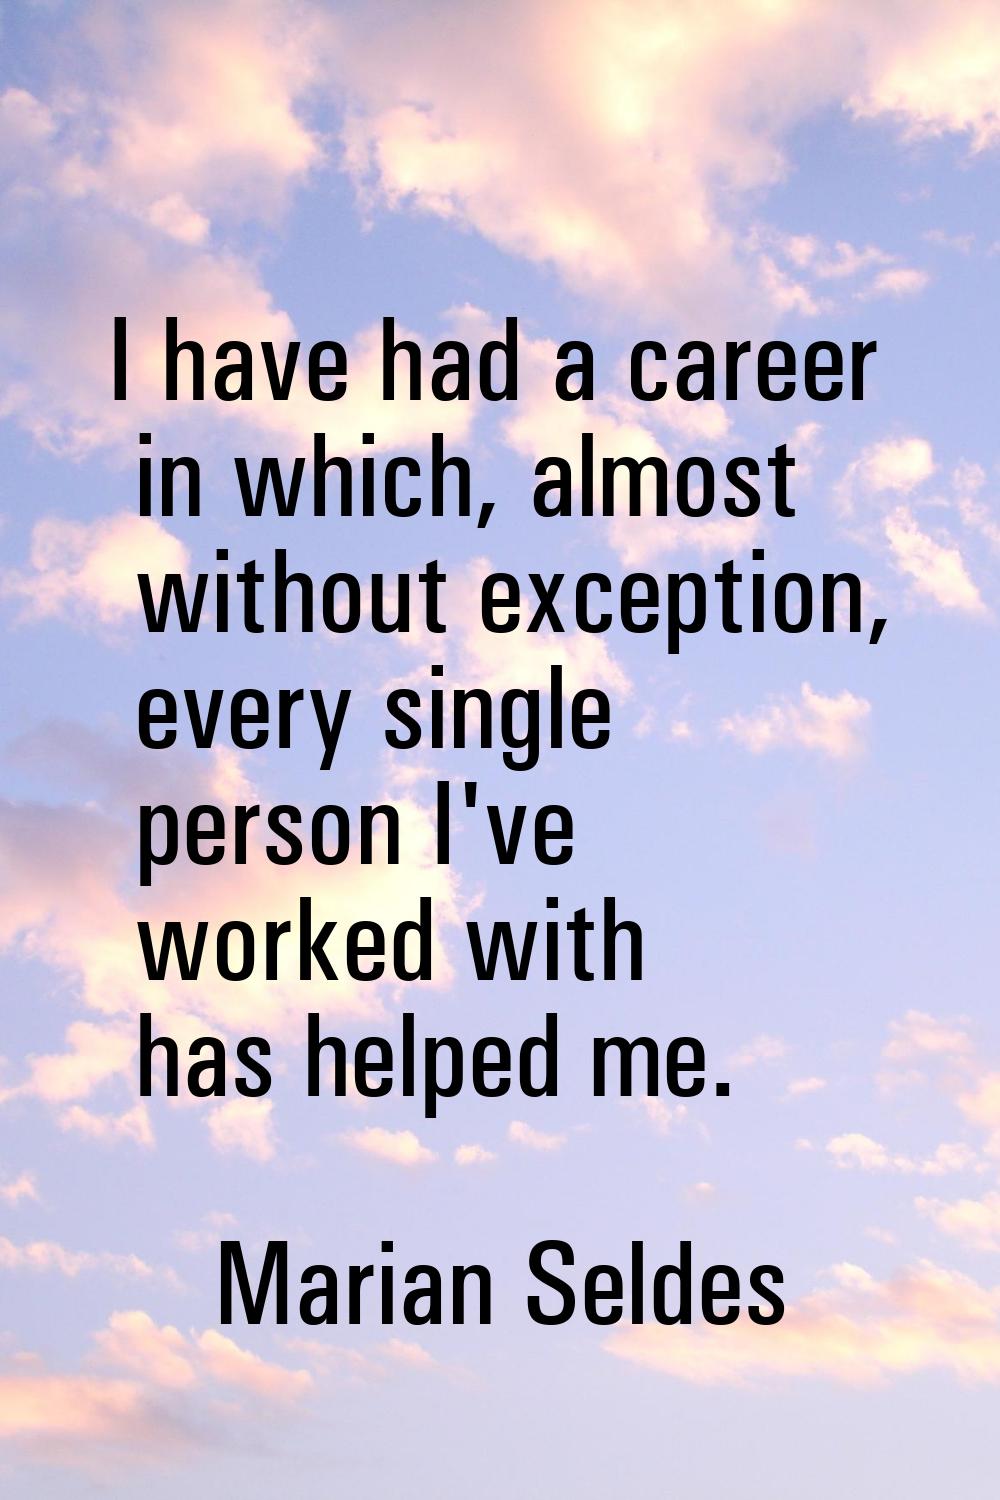 I have had a career in which, almost without exception, every single person I've worked with has he